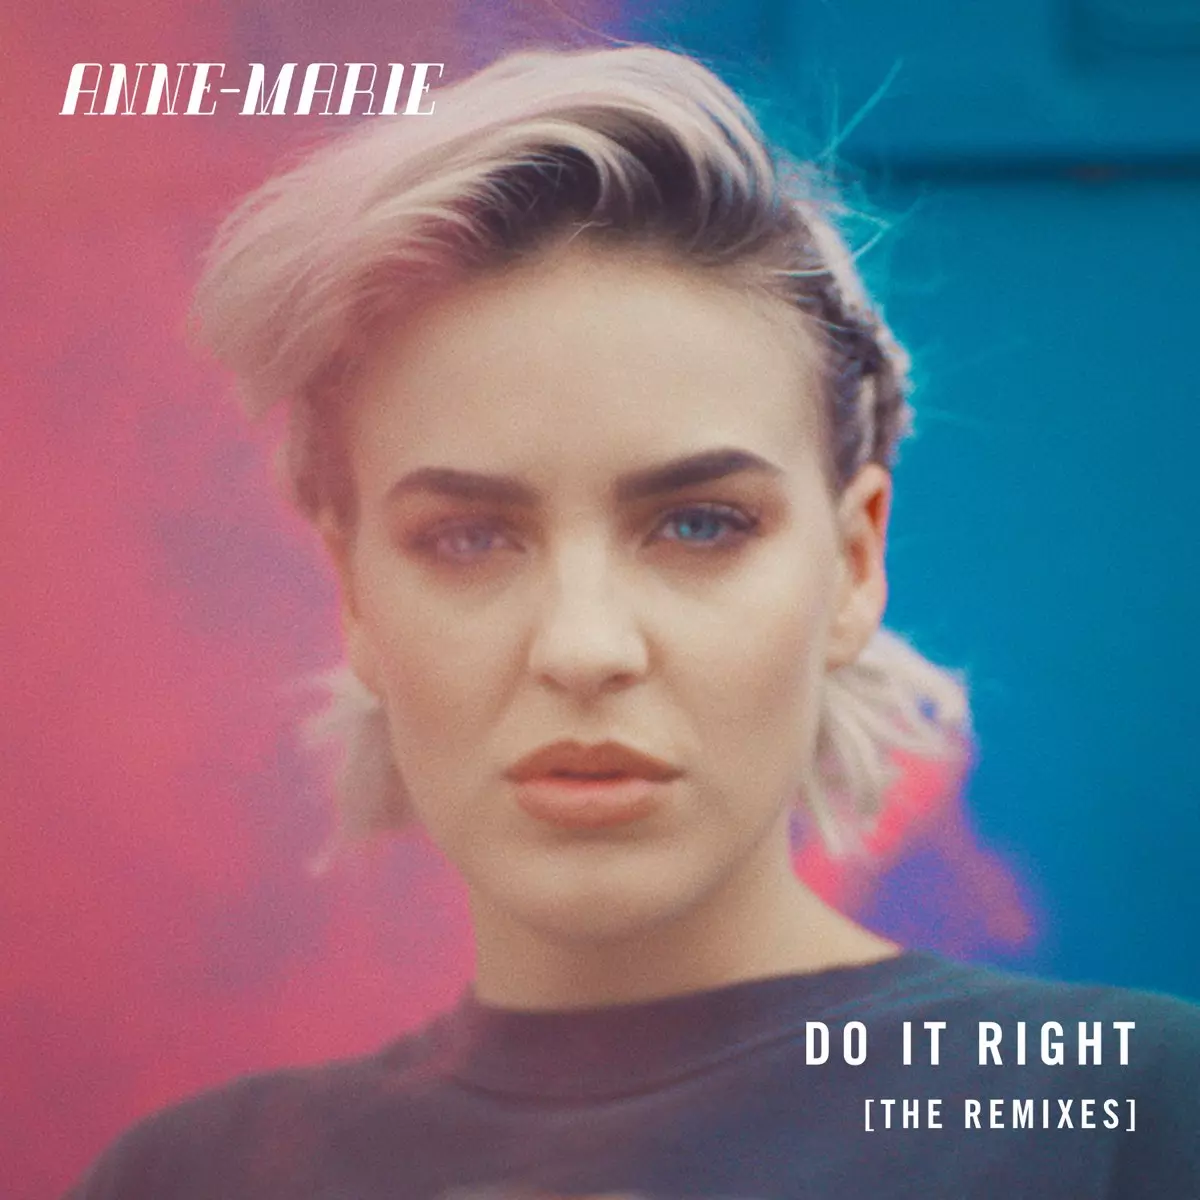 Do It Right (Remixes) - Single by Anne-Marie on Apple Music